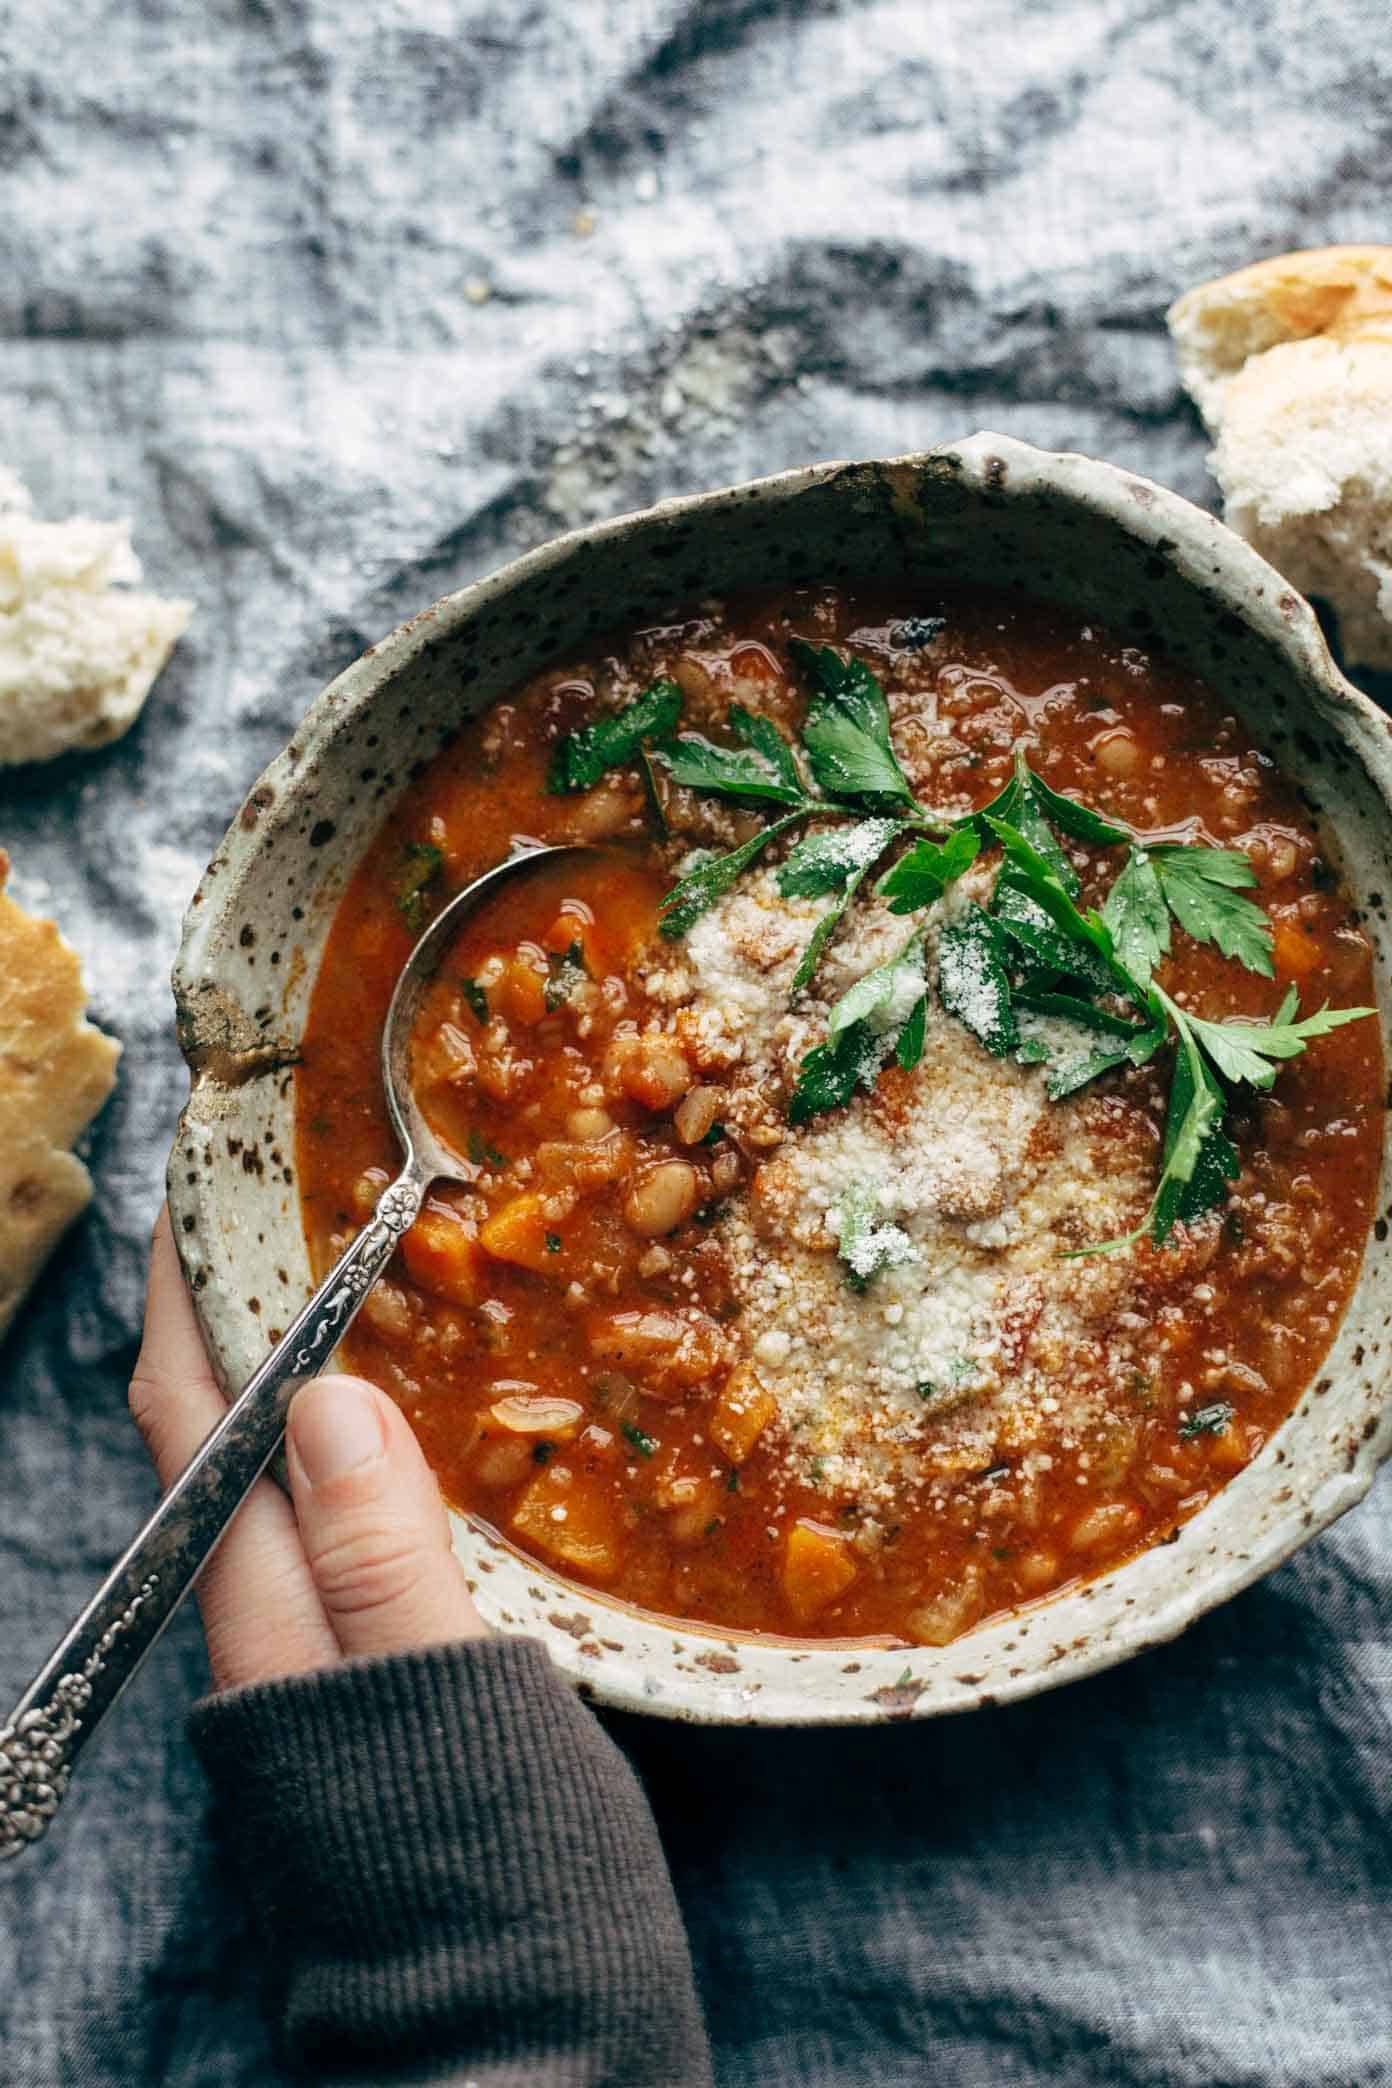 Instant Pot Minestrone Soup! Thick + chunky with veggies, garlic, beans, pesto, tomato sauce. Topped with Parm and served with bread. Easily made vegan. | pinchofyum.com